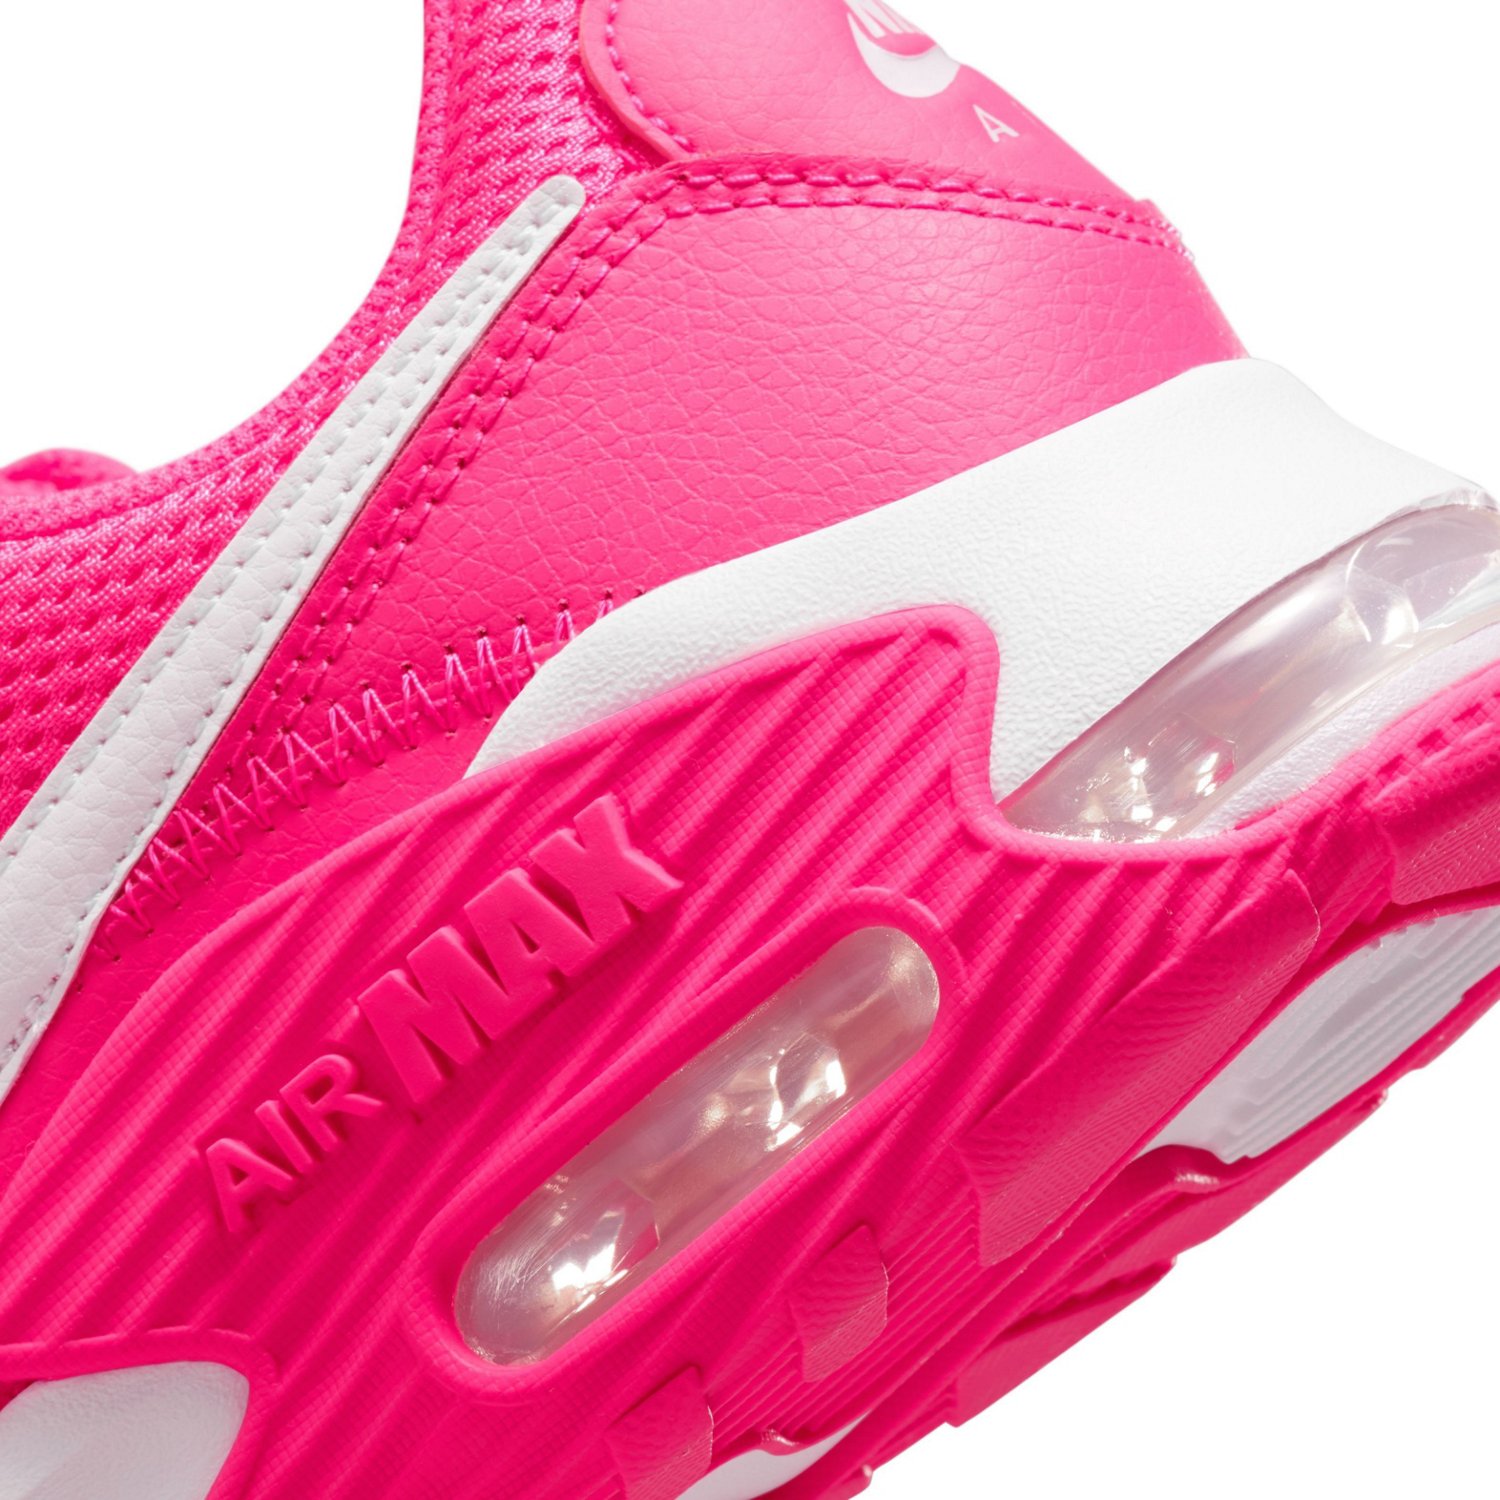 Nike Women's Air Max Excee Shoes, Size 8, Pink/Pink